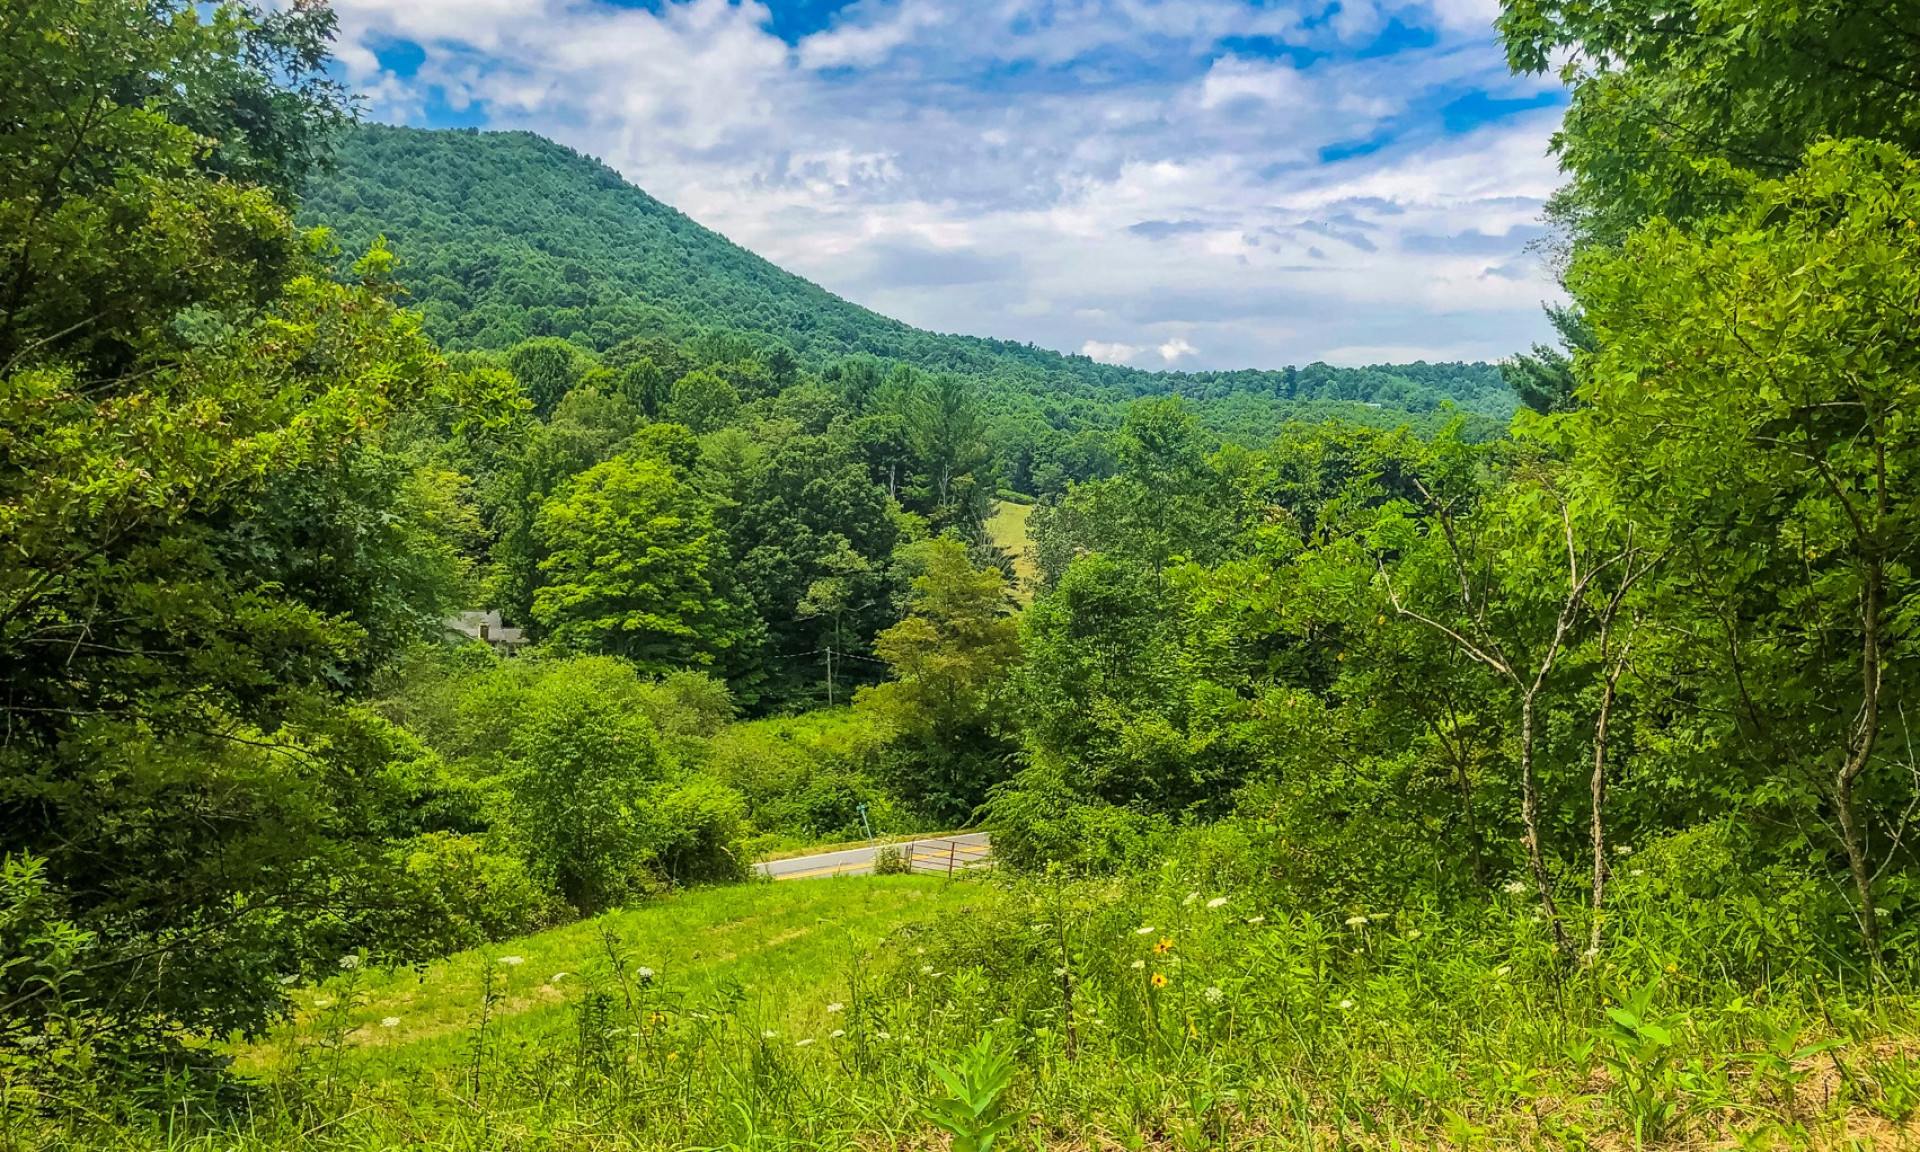 21+ Acres of beautiful NC Mountain Land located in the Todd area of Southern Ashe County.